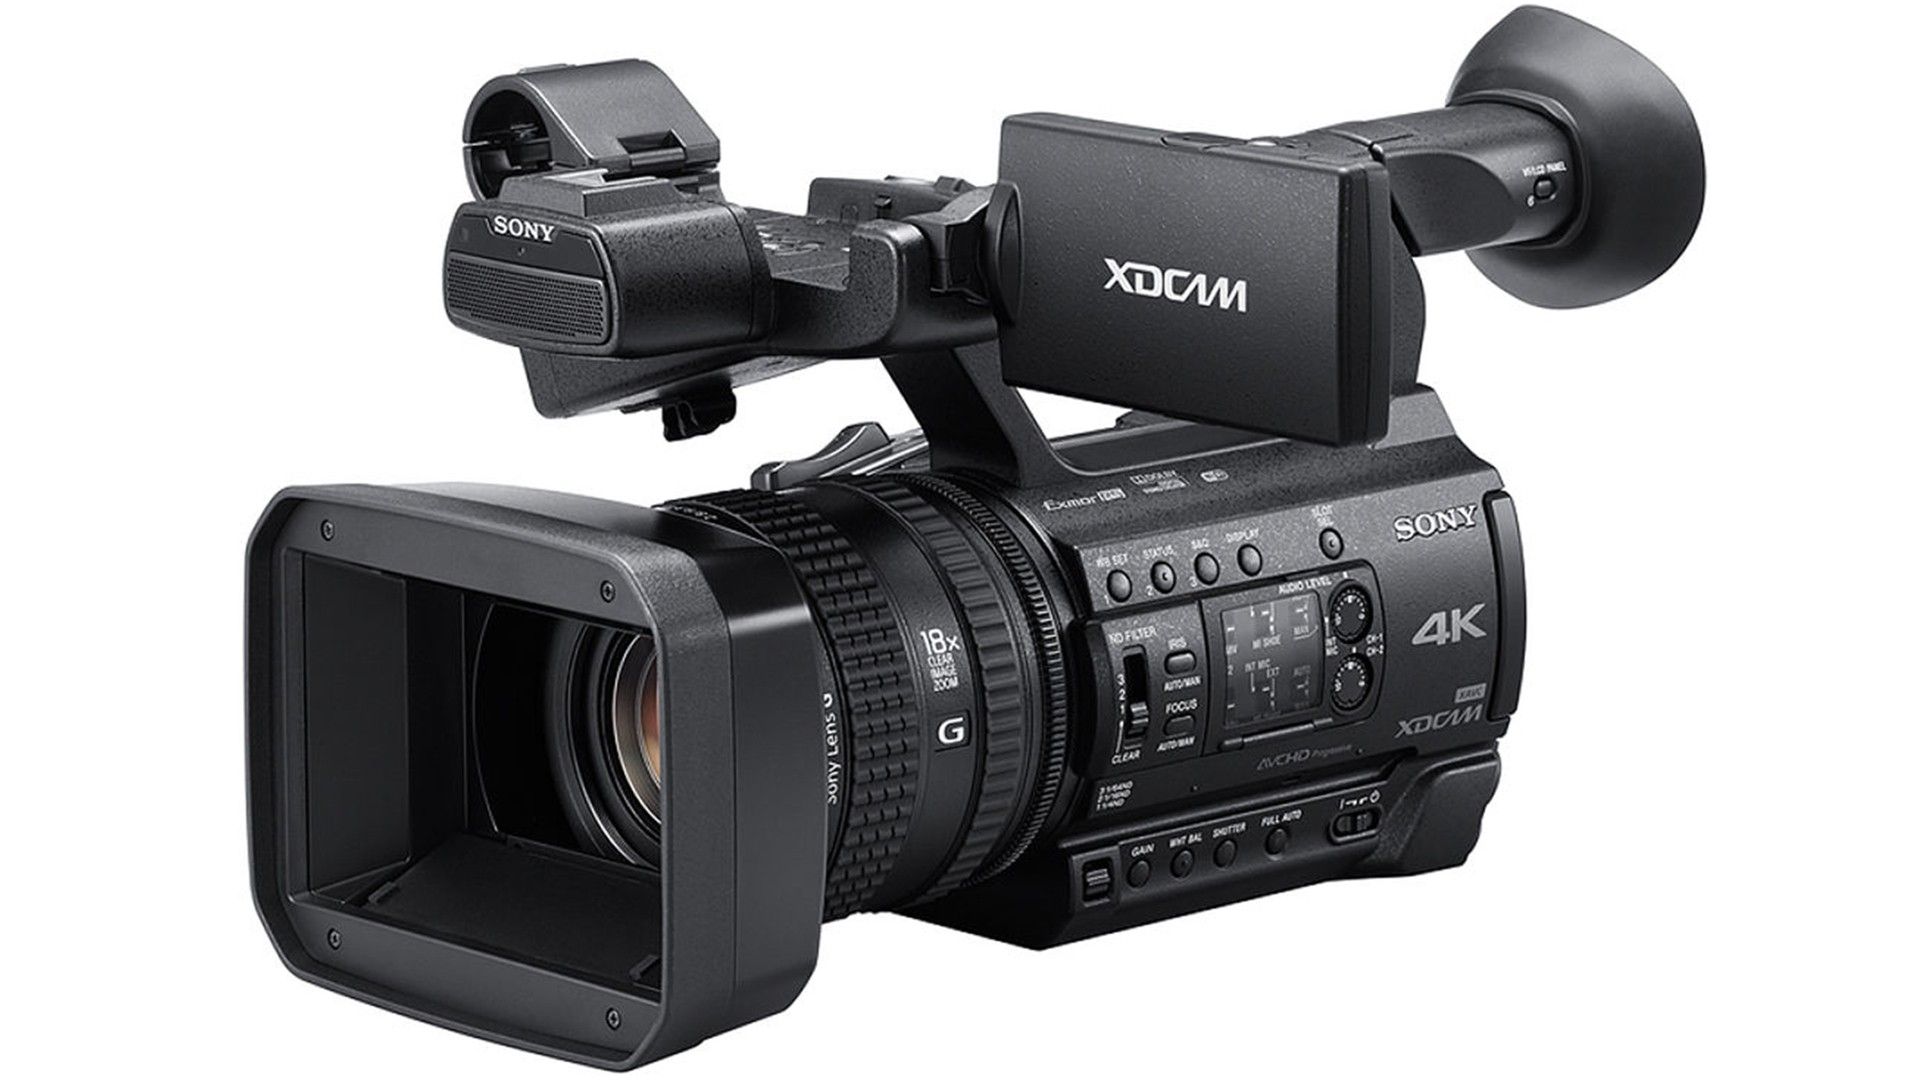 Sony's New PXW-Z150 4K Camera Shoots HD Up to 120fps